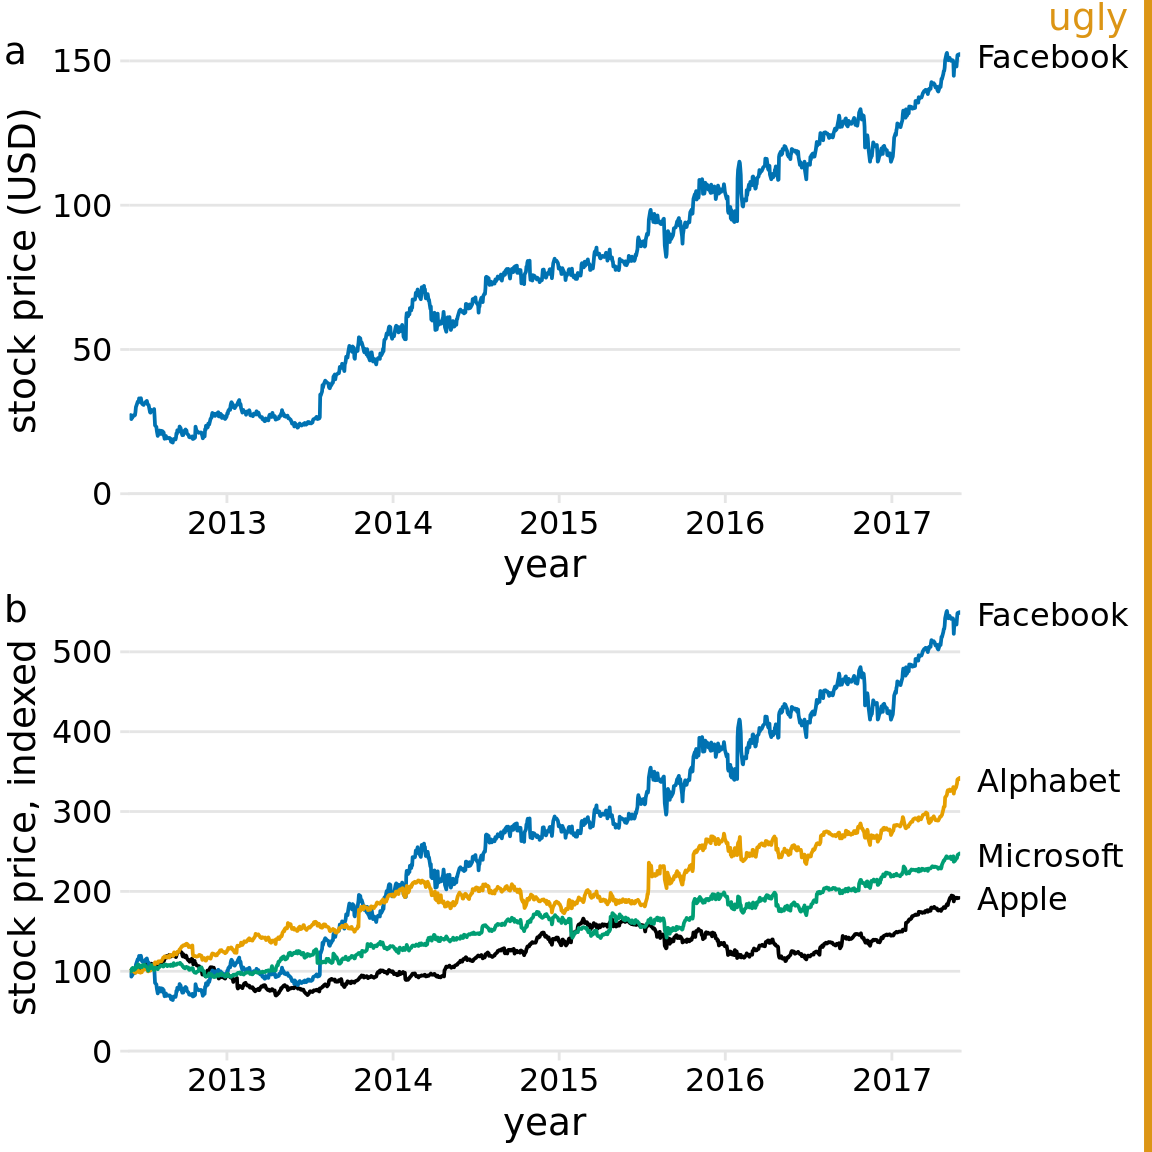 Growth of Facebook stock price over a five-year interval and comparison with other tech stocks. (a) The Facebook stock price rose from around $25/share in mid-2012 to $150/share in mid-2017. (b) The prices of other large tech companies did not rise comparably over the same time period. Prices have been indexed to 100 on June 1, 2012 to allow for easy comparison. This figure is labeled as “ugly” because parts (a) and (b) are repetitive. Data source: Yahoo Finance